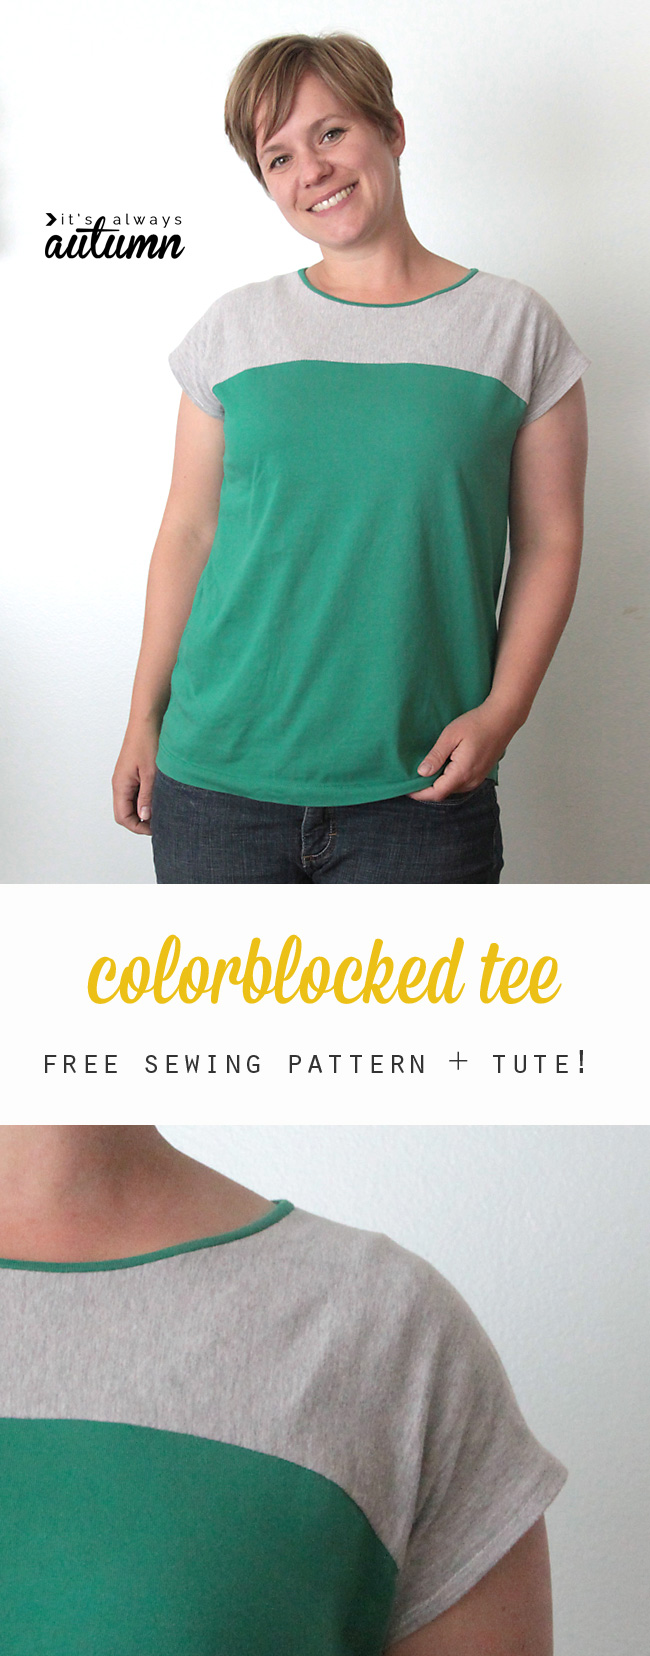 Free pattern and sewing tutorial for this easy to sew color blocked women's tee shirt.